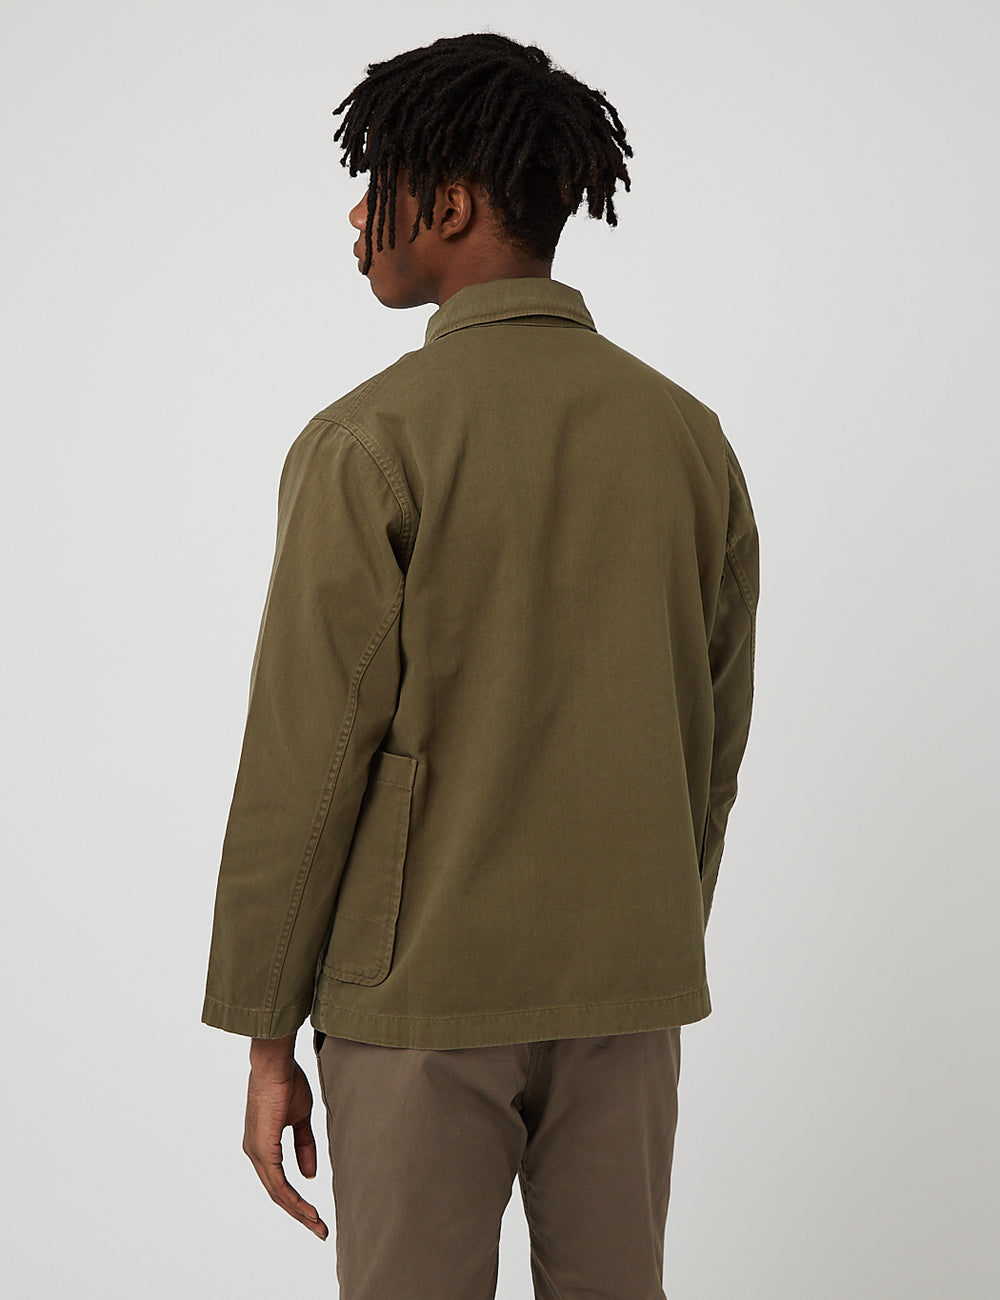 Gramicci Utility Jacket - Olive Green | URBAN EXCESS.